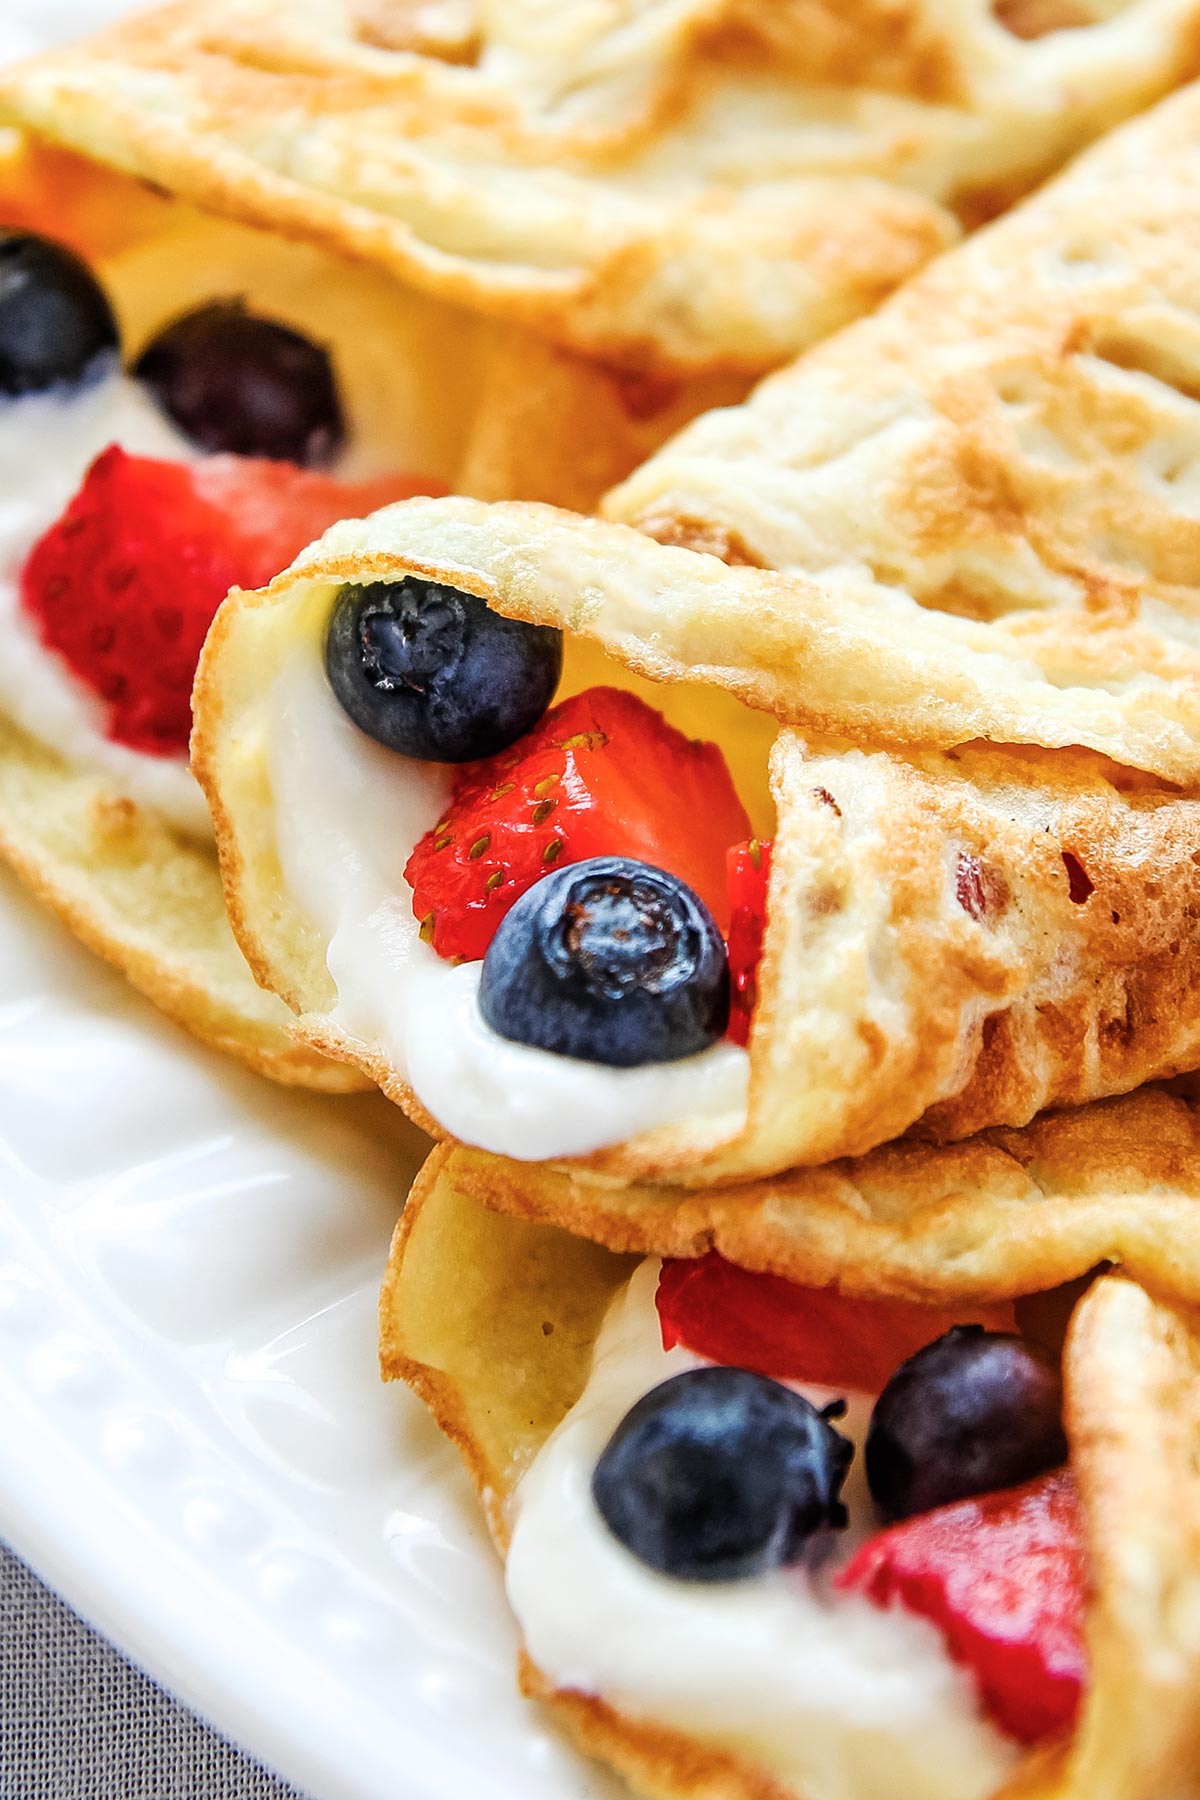 Rolled Crepes with Berries